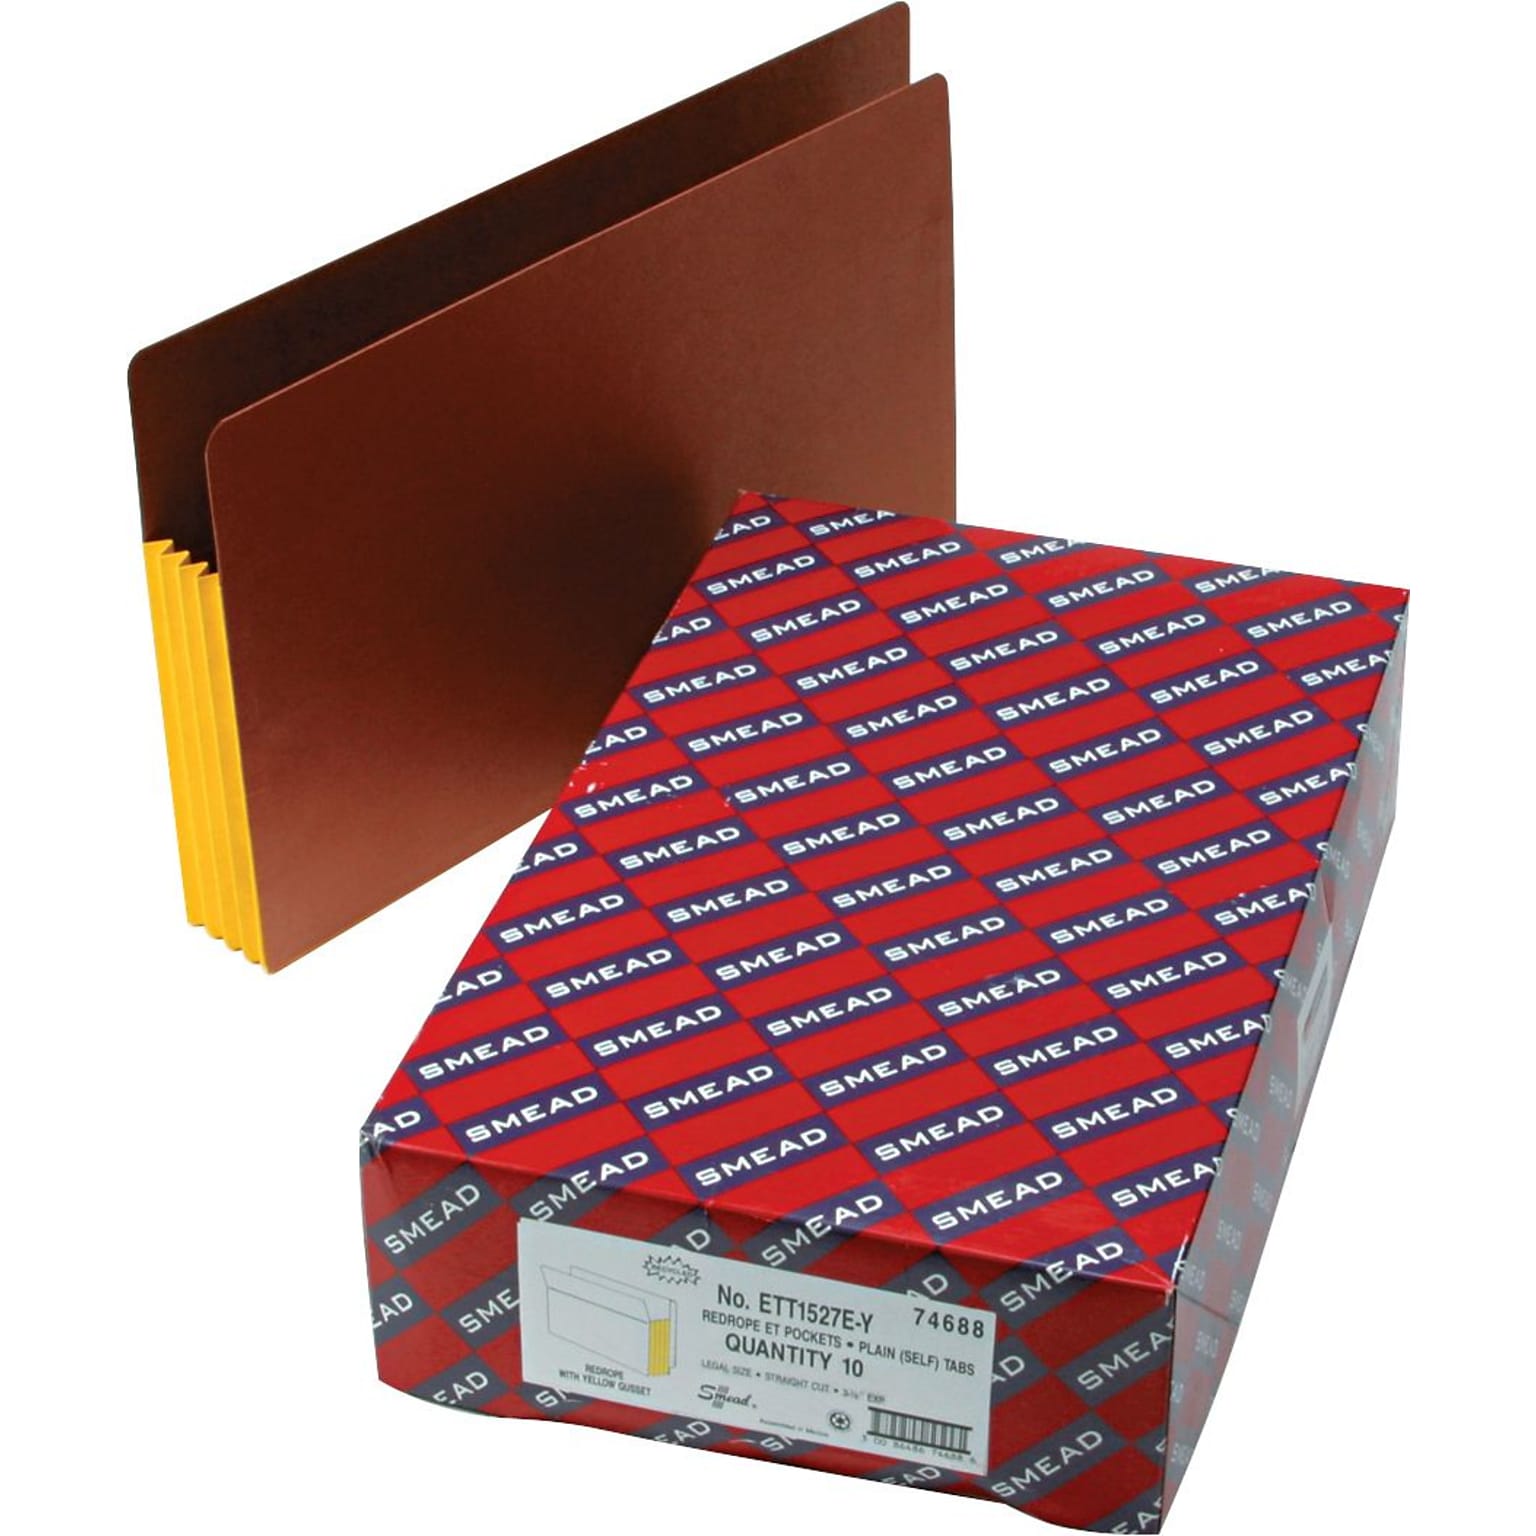 Smead 30% Recycled Reinforced File Pocket, 3 1/2 Expansion, Legal Size, Yellow/Redrope, 10/Box (74688)